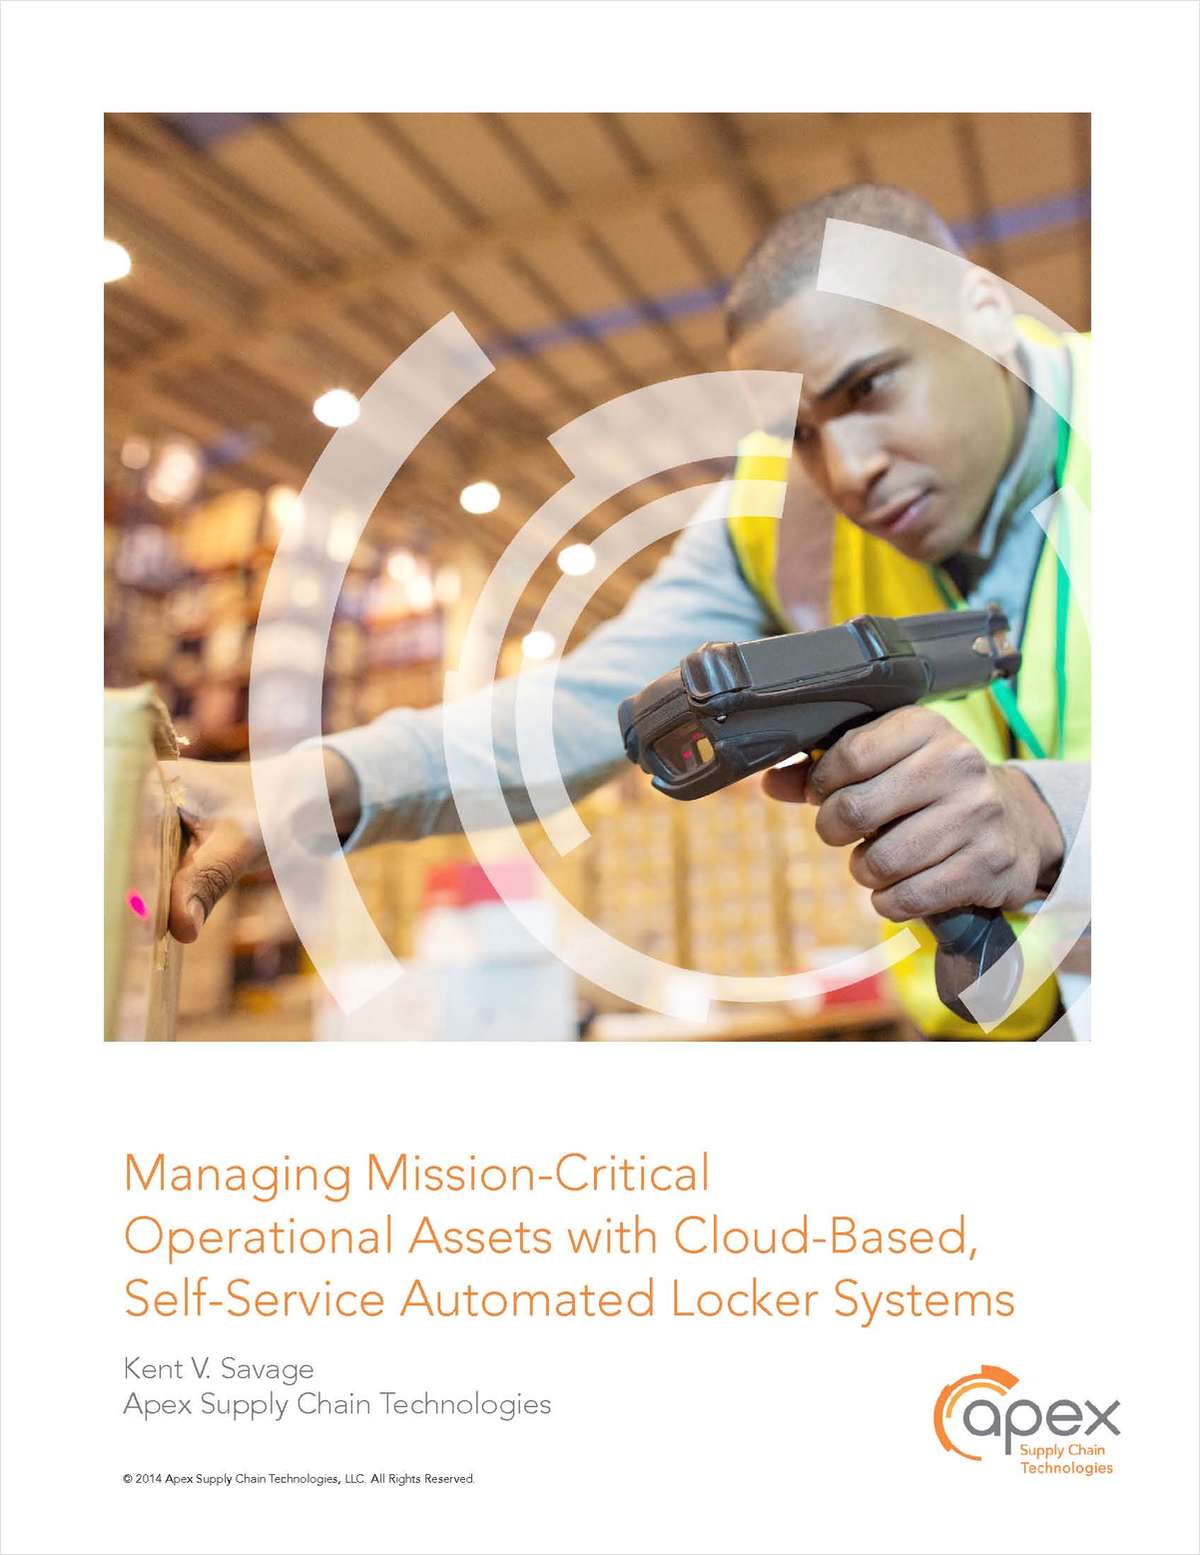 Managing Mission-Critical Operational Assets with Cloud-Based, Self-Service Automated Locker Systems